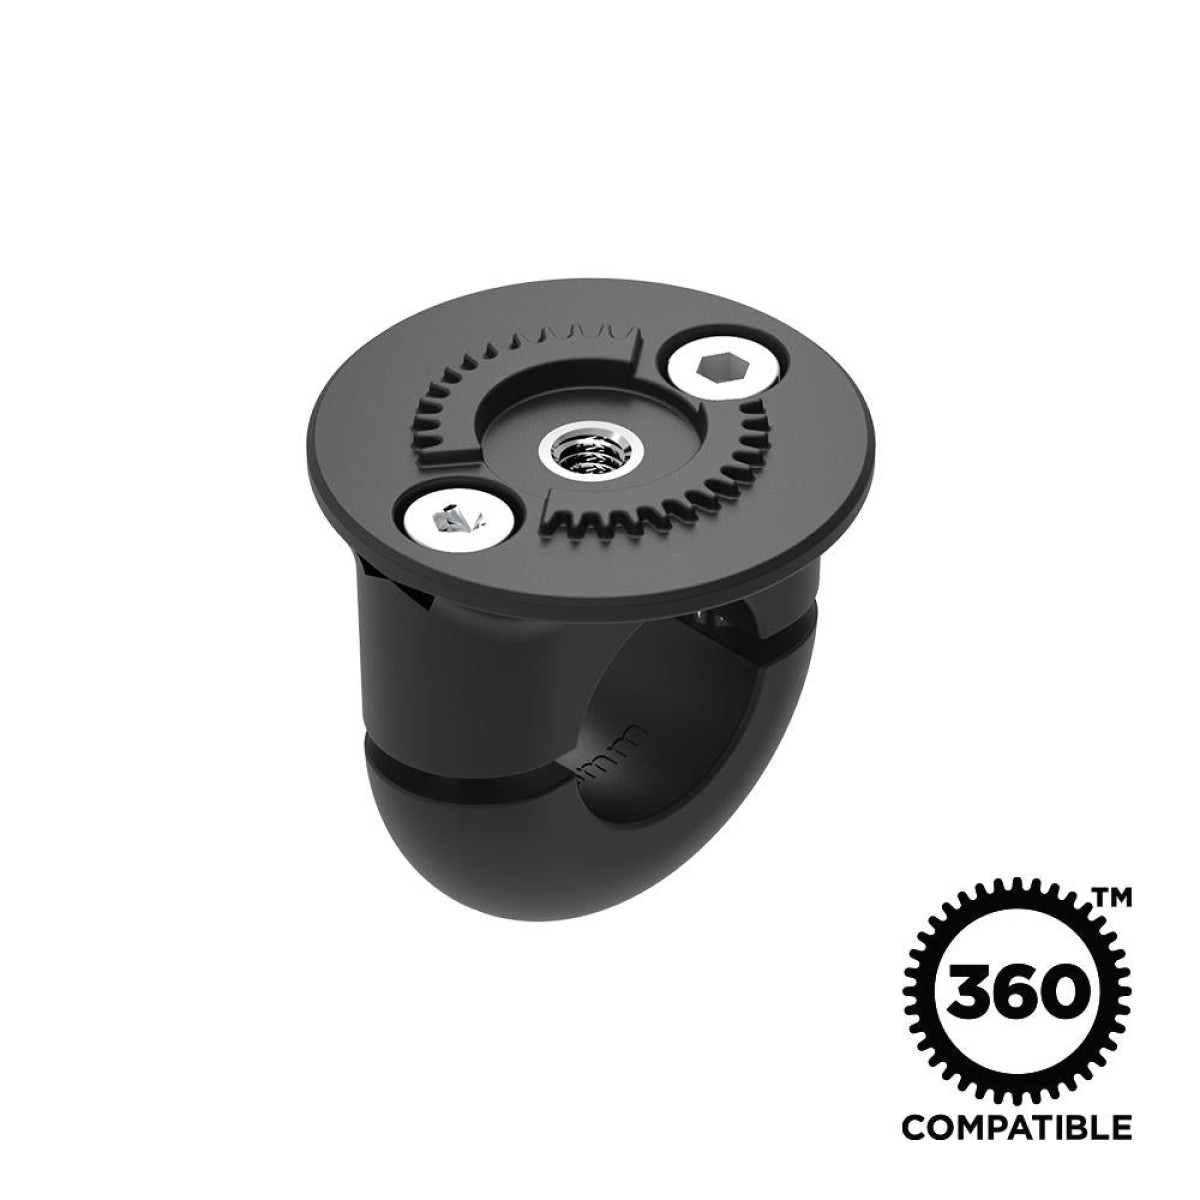 Quad Lock Knuckle Adaptor for Motorcycle/Scooter 